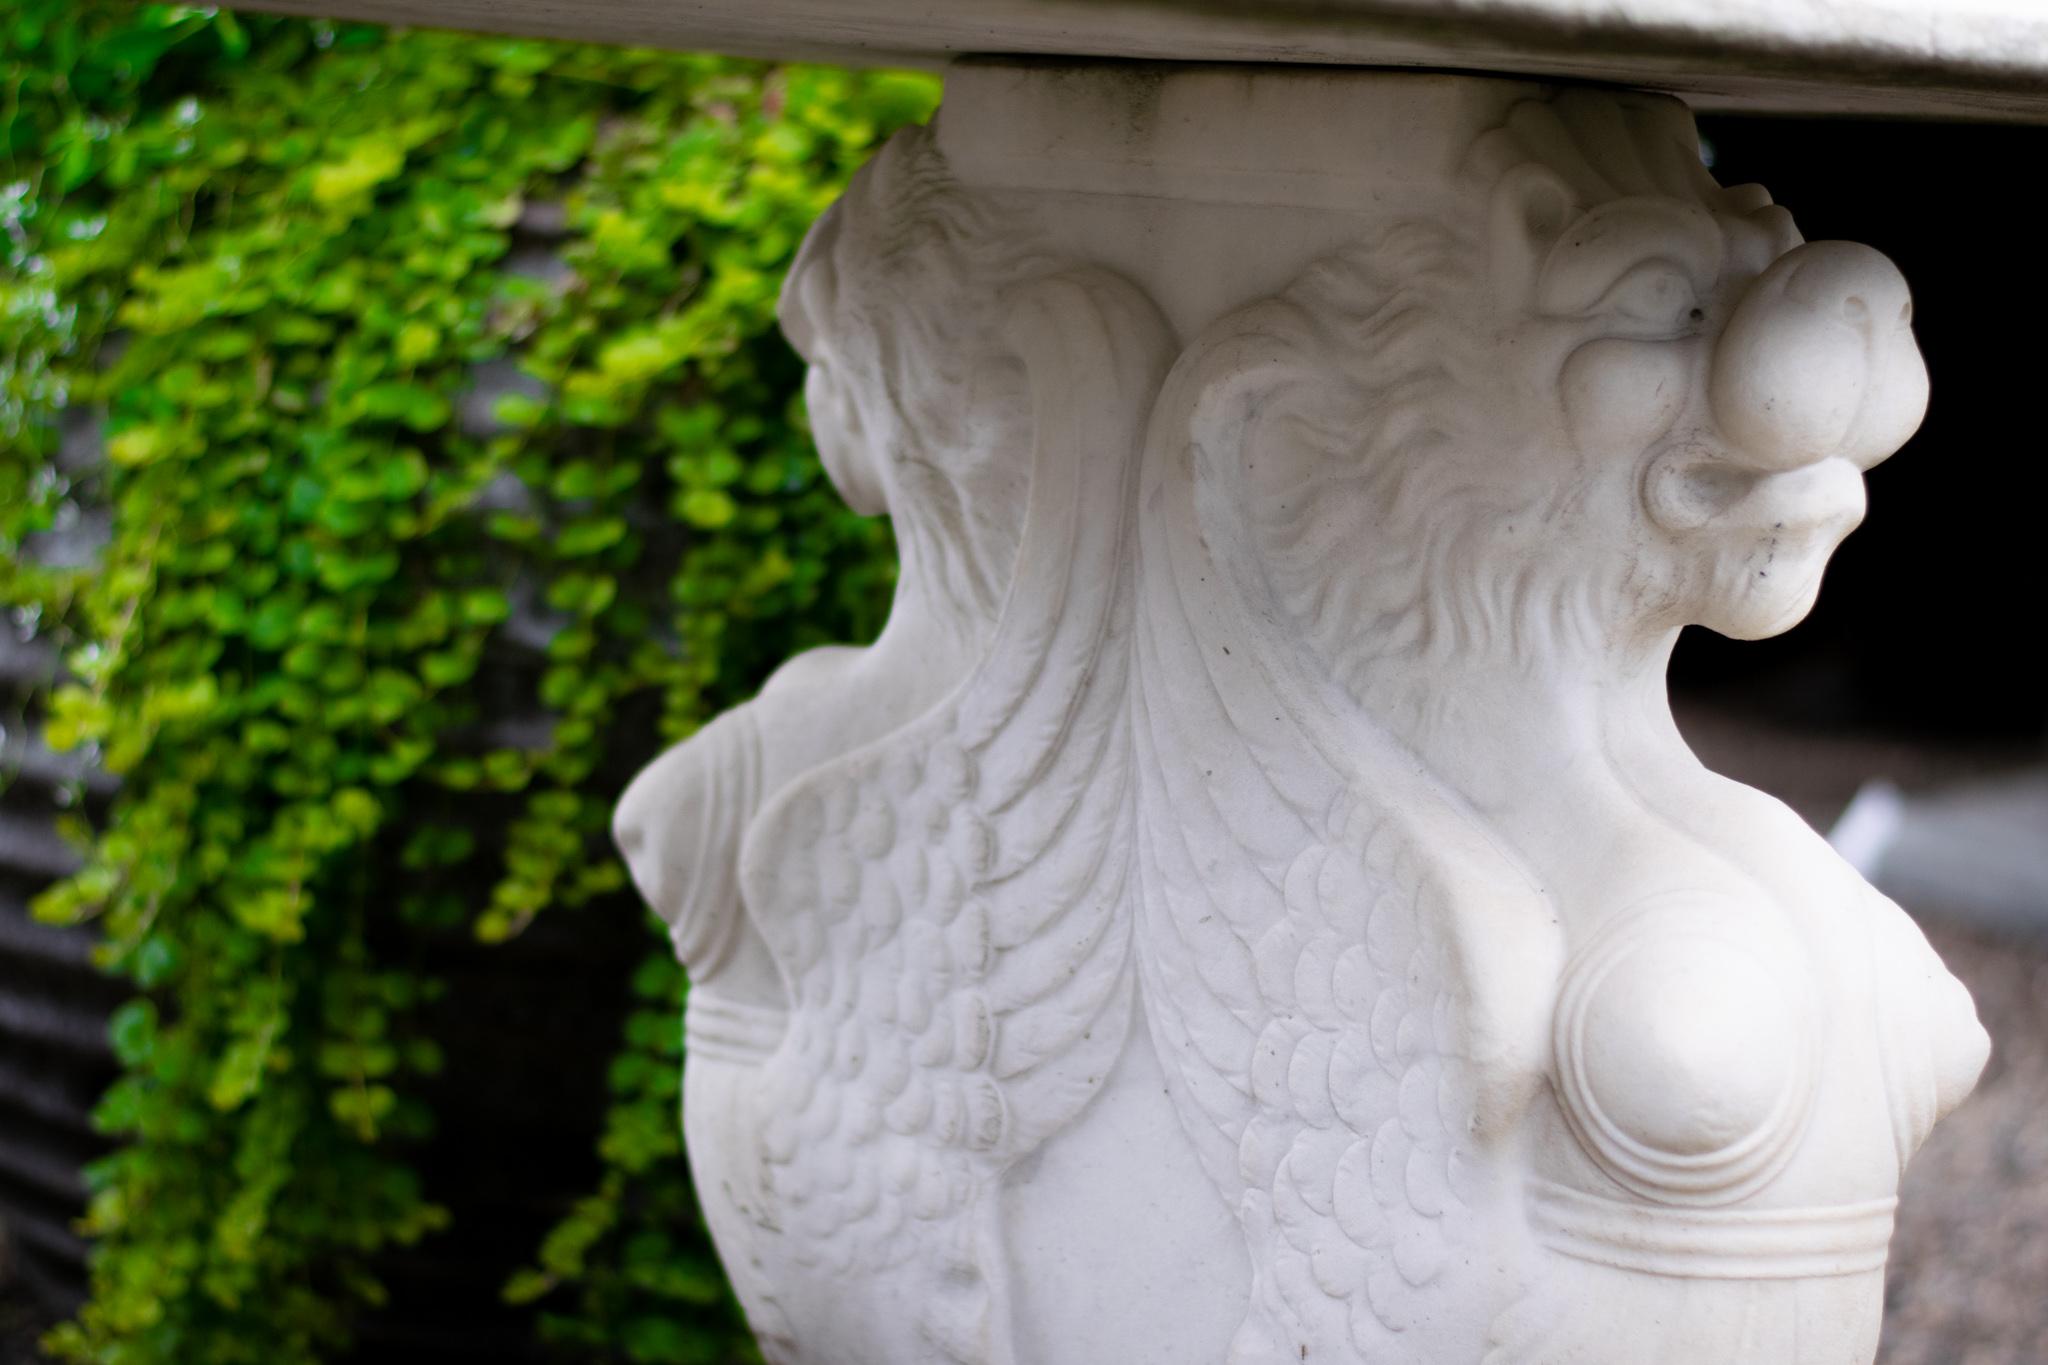 A wonderfully carved vintage marble table featuring an intriguing botanical pattern on the top surrounding an anonymous face, supported by an impressive pair of winged lions feet. Poised to be the center of attention, this stunning white table will